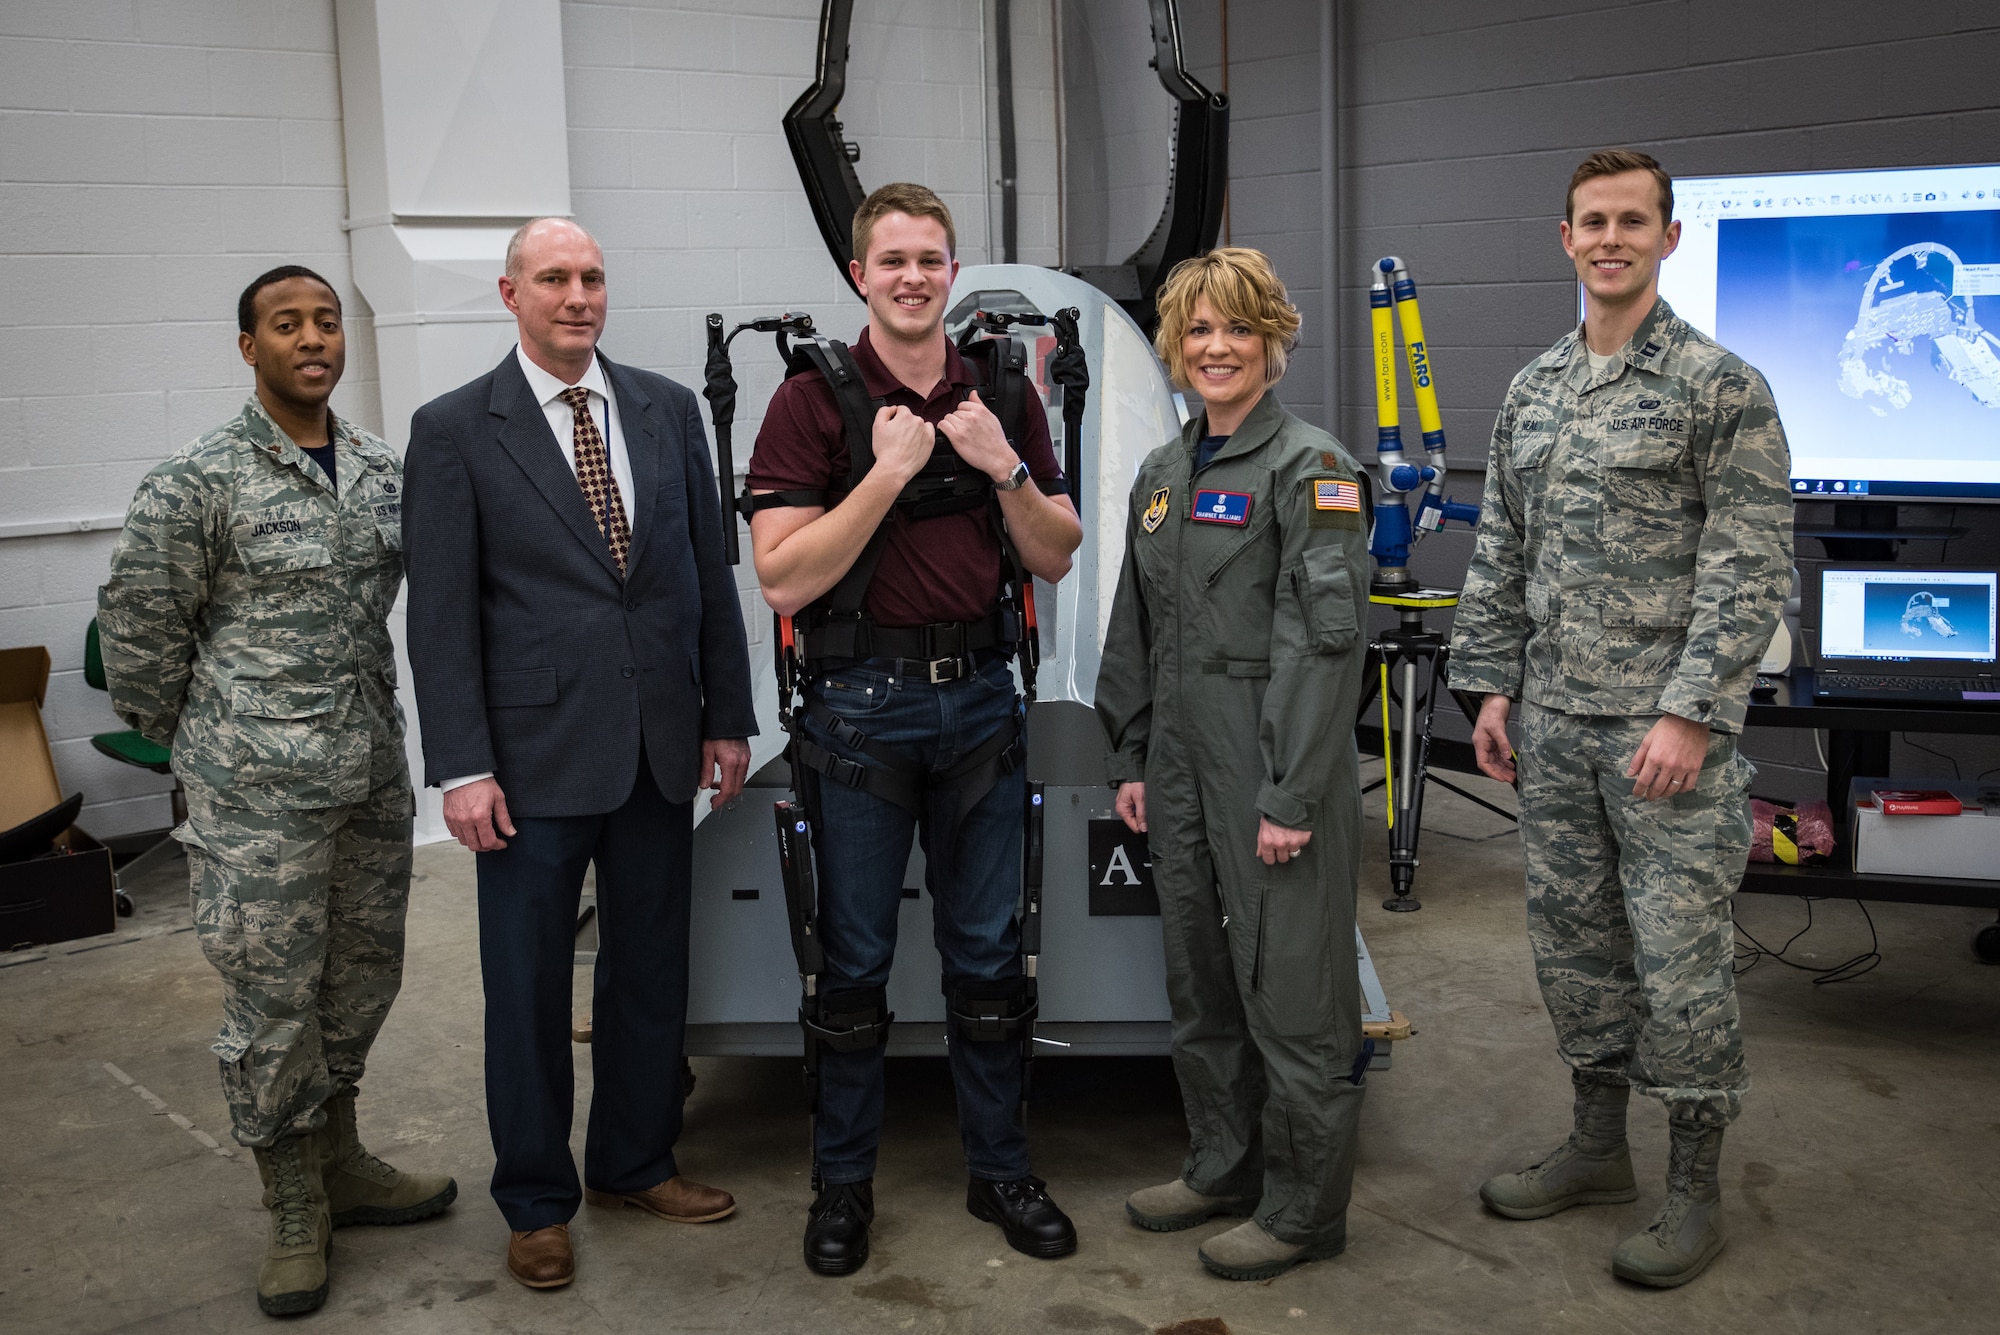 Maj. Shawnee Williams (second from right) stands with her team (from left) - Maj. Bryan Jackson, Dr. Daniel Mountjoy, Mr. Corey Shanahan, and Capt. Dan Neal - in the newly renovated anthropometry lab at the 711th Human Performance Wing's Human Systems Integration Directorate. (U.S. Air Force photo by Rick Eldridge)